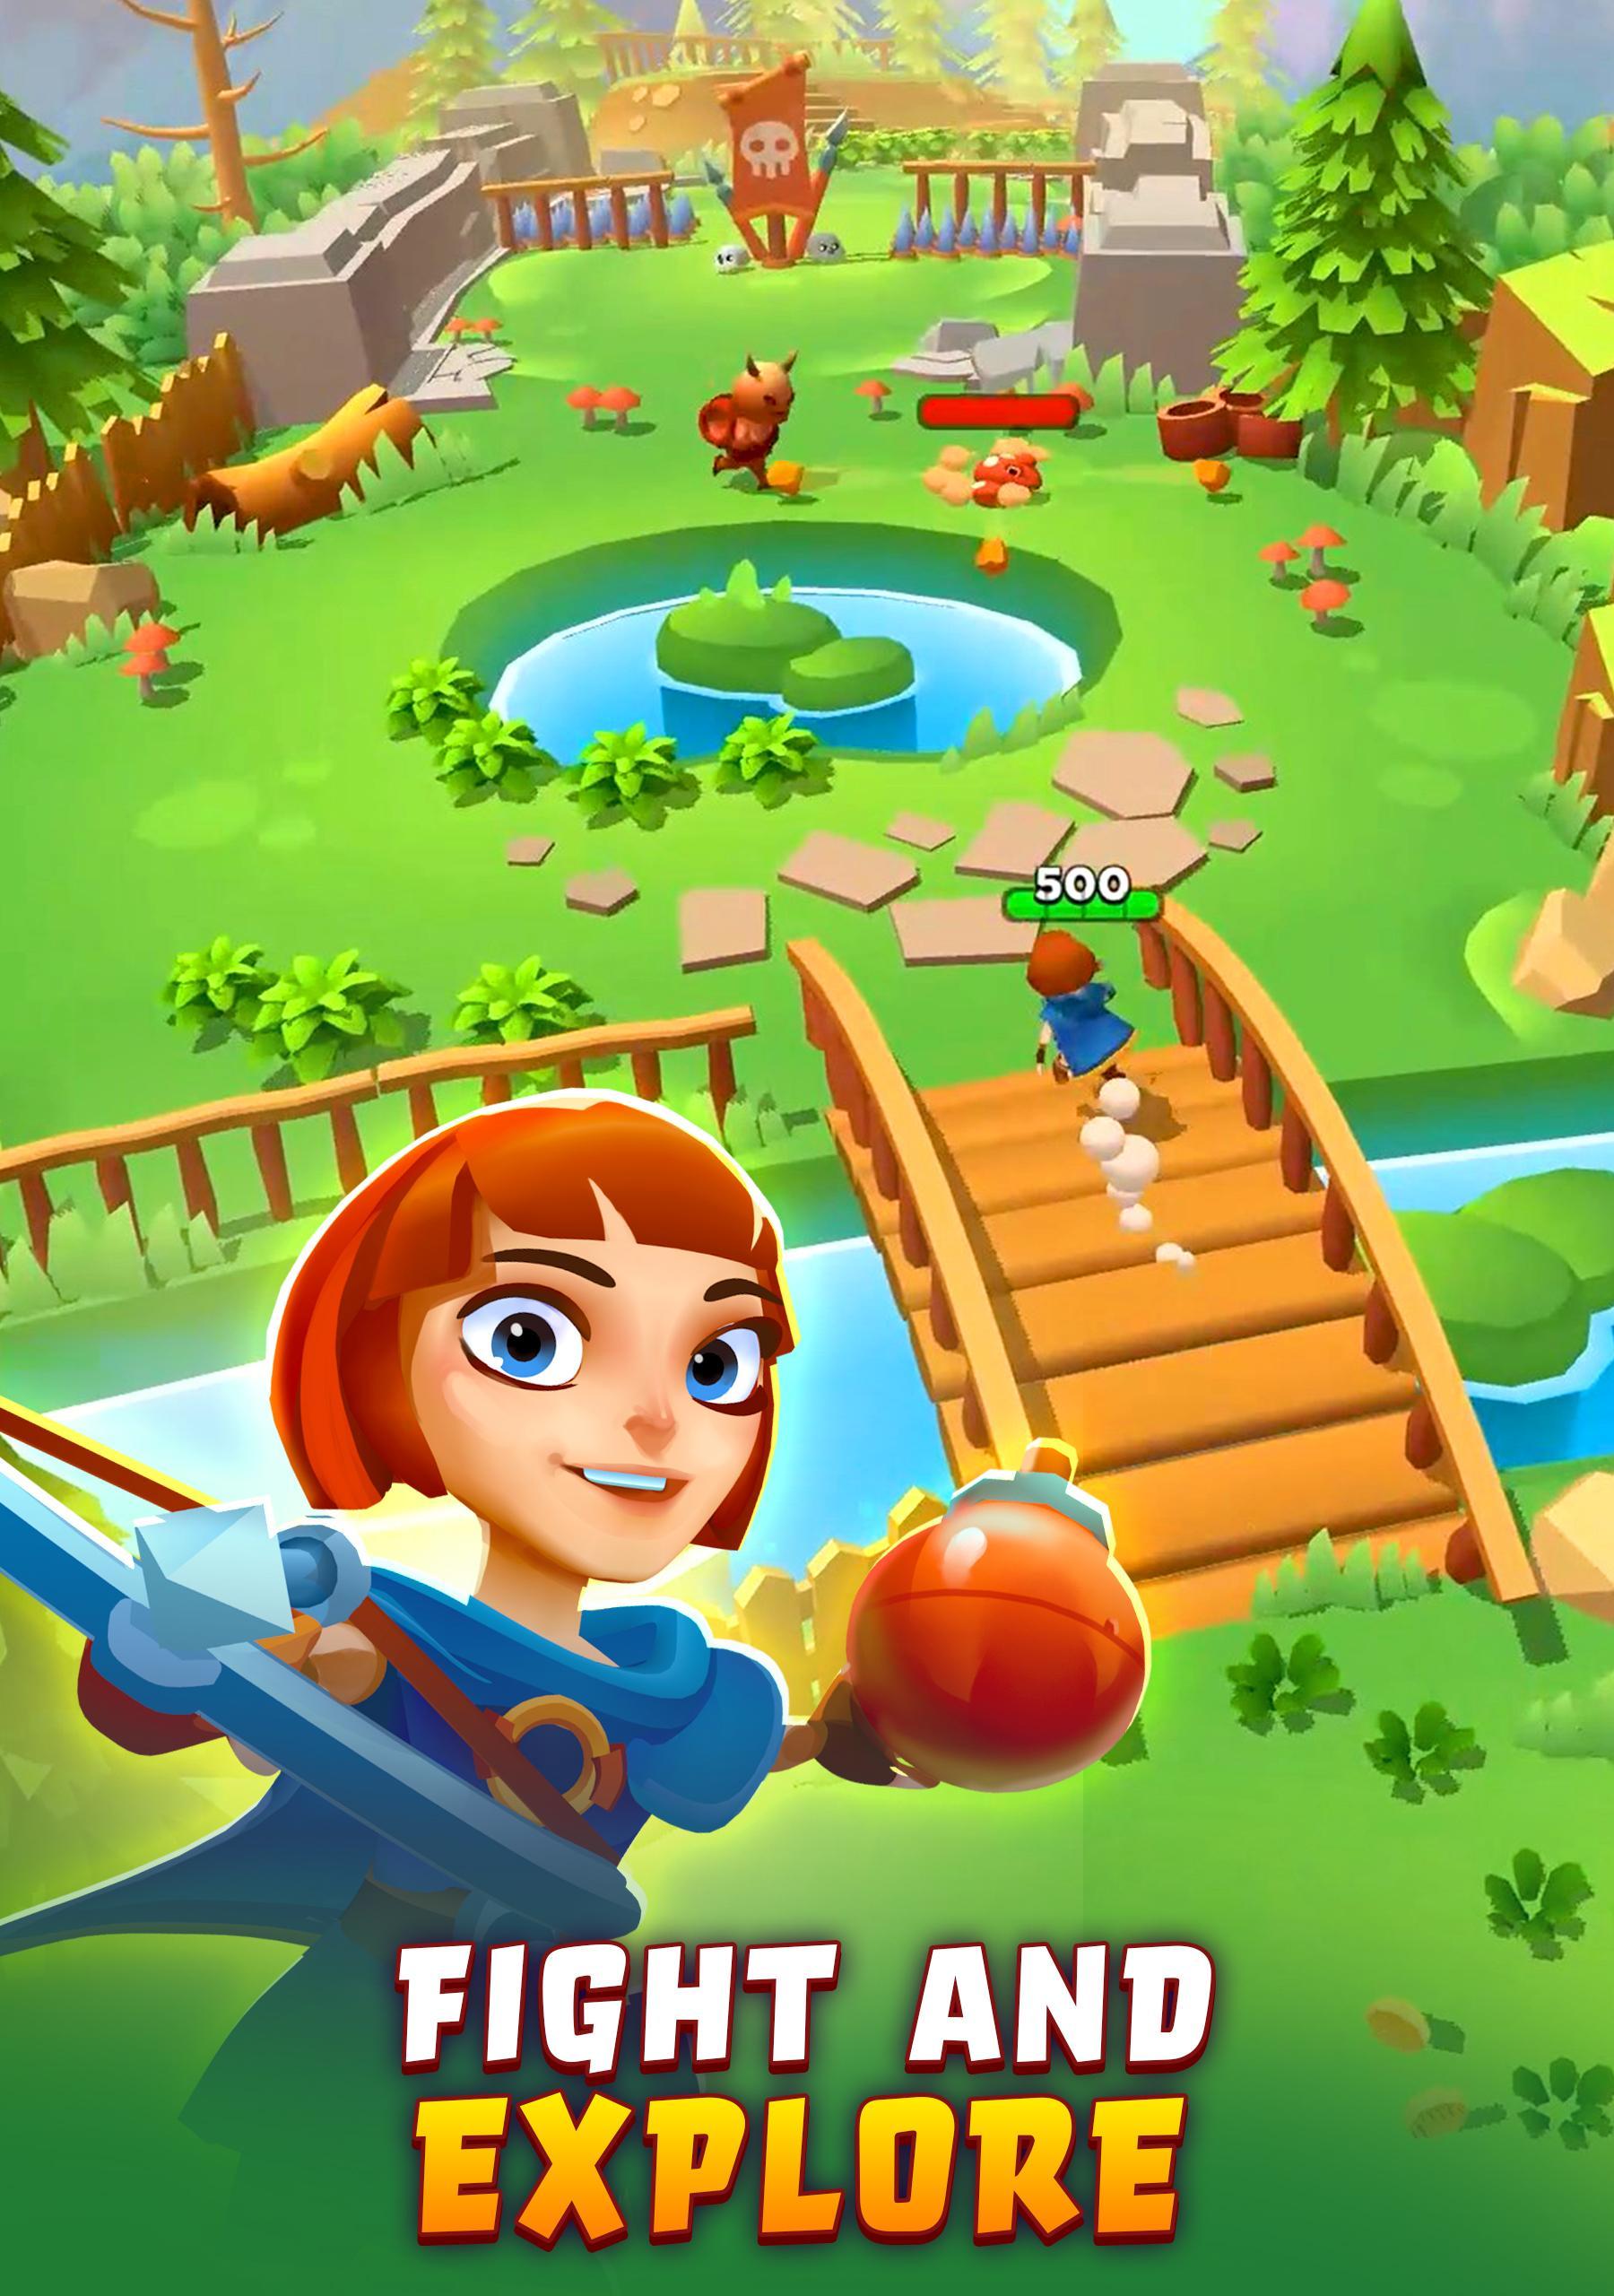 Bow Land From Huuuge Games is Up For Pre-Registration On Android